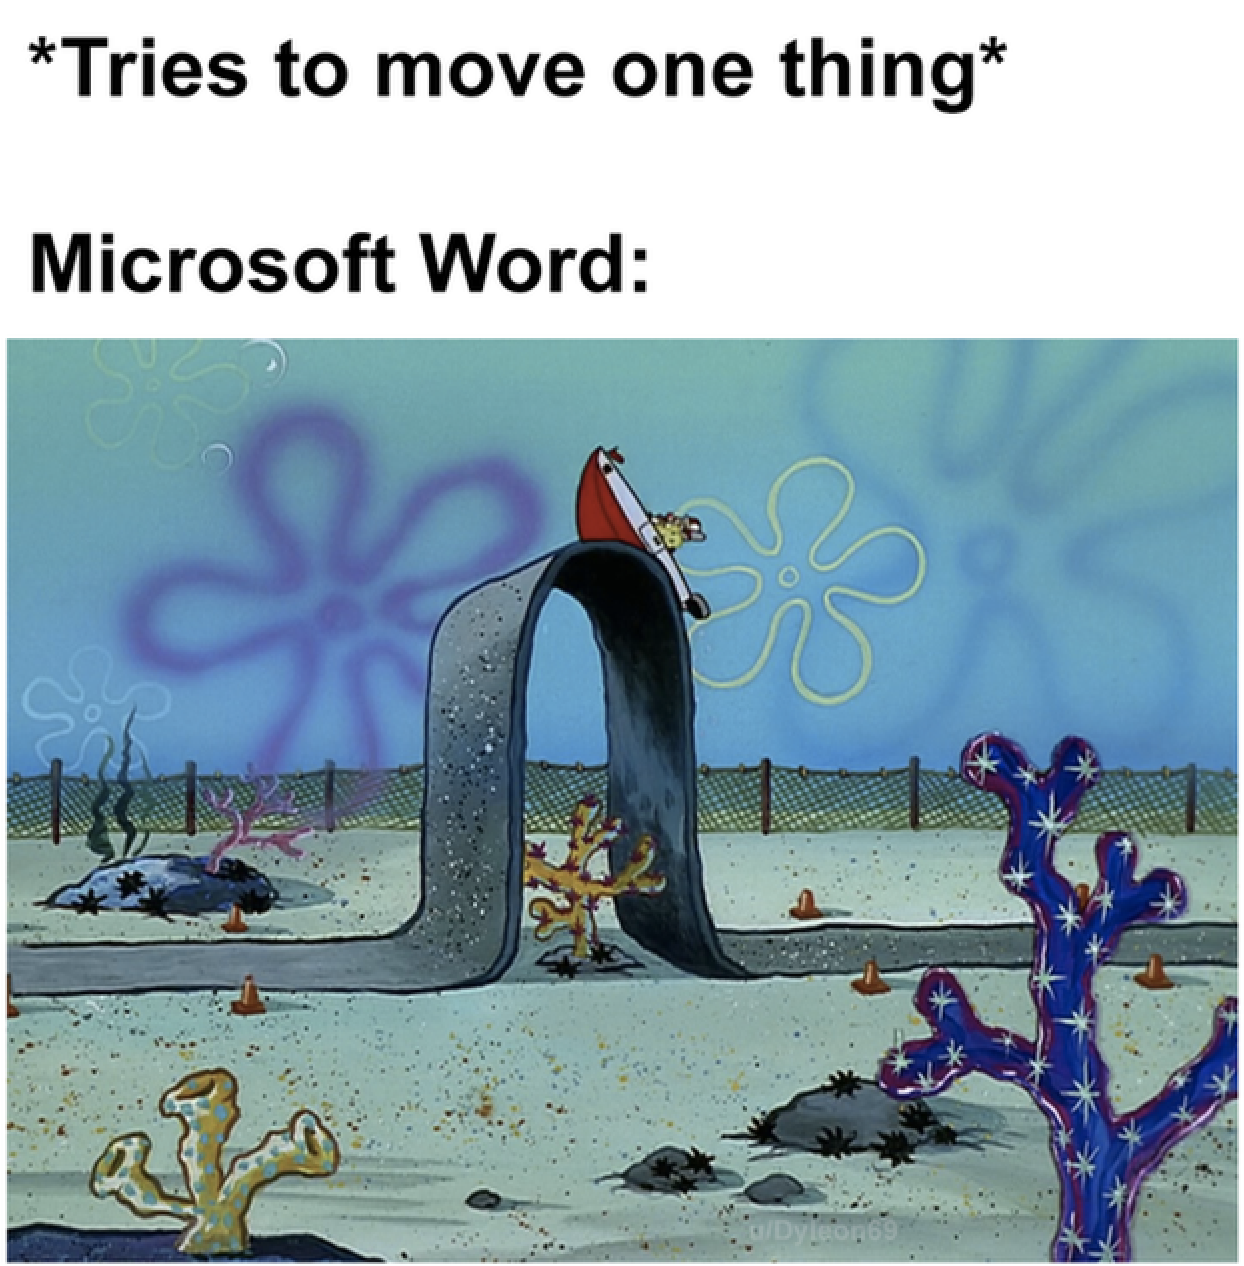 water - Tries to move one thing Microsoft Word